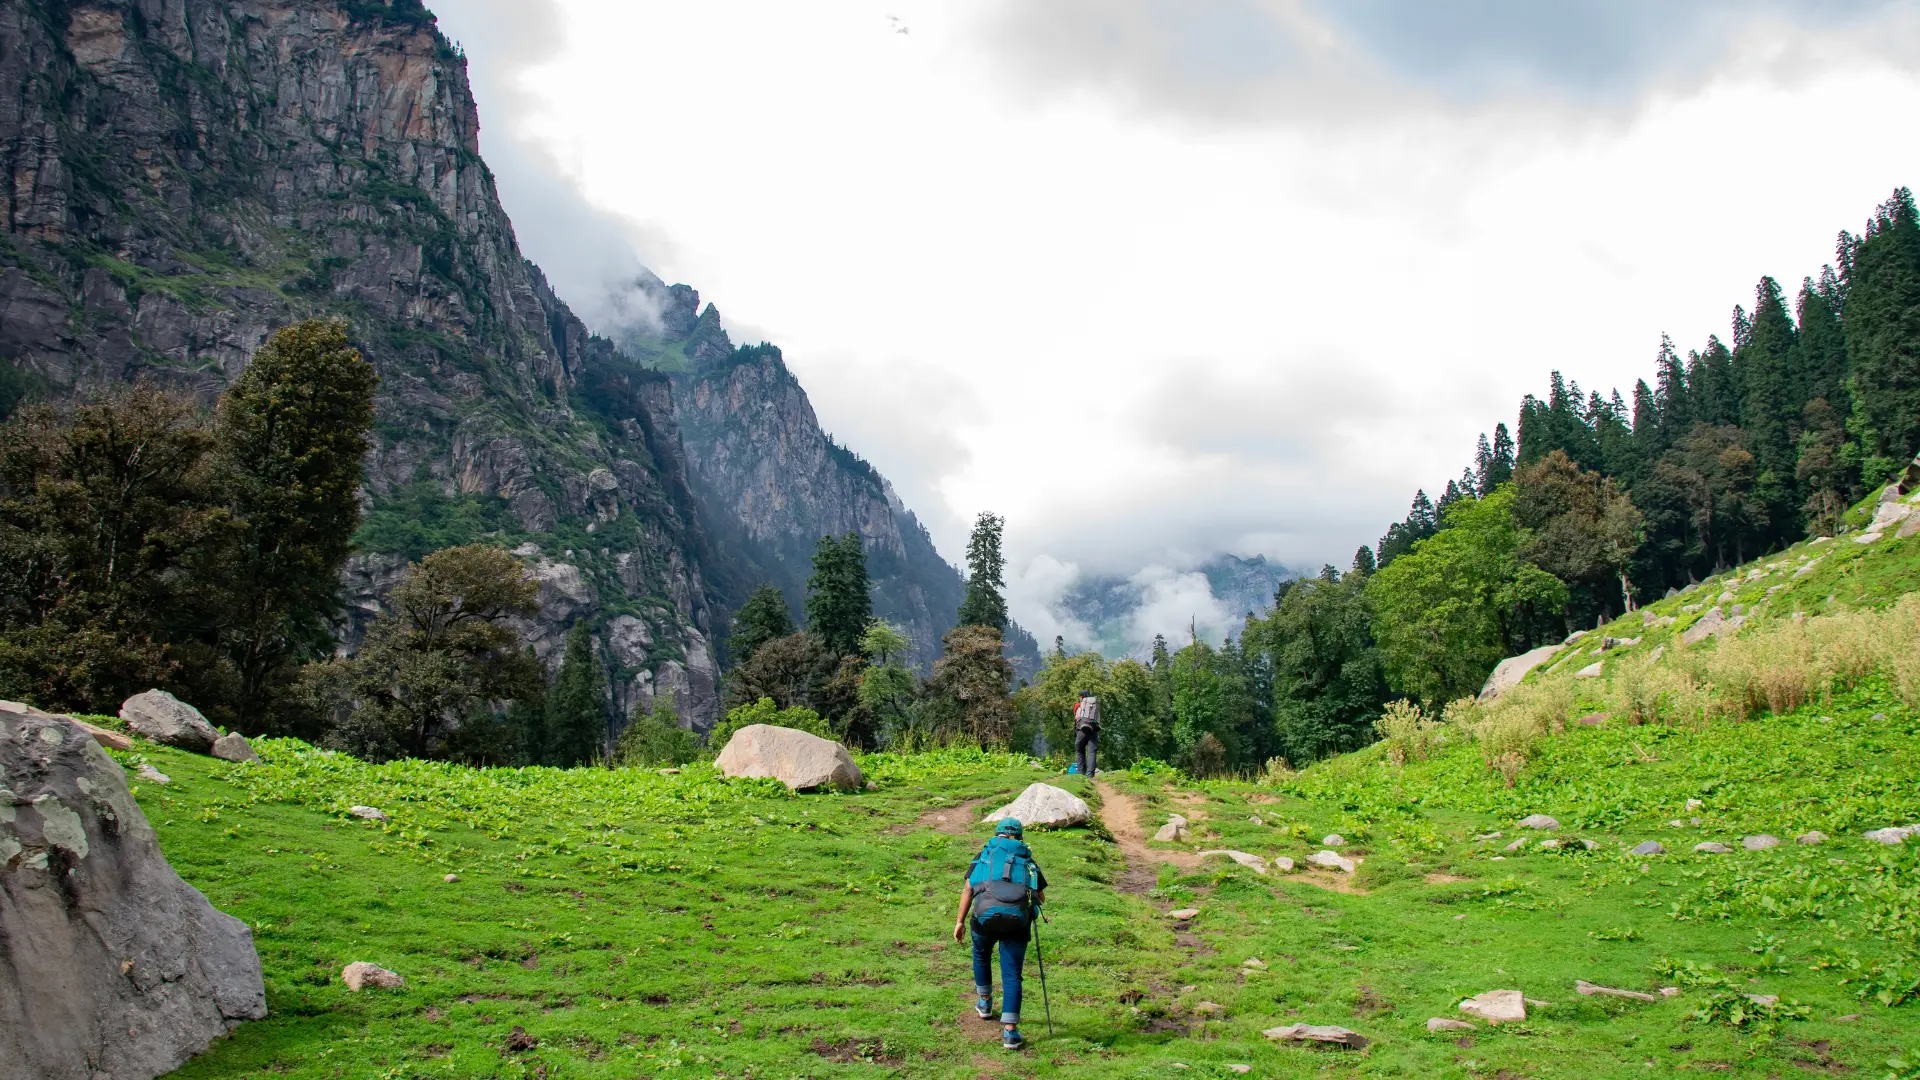 The best monsoon treks in India, as recommended by adventure